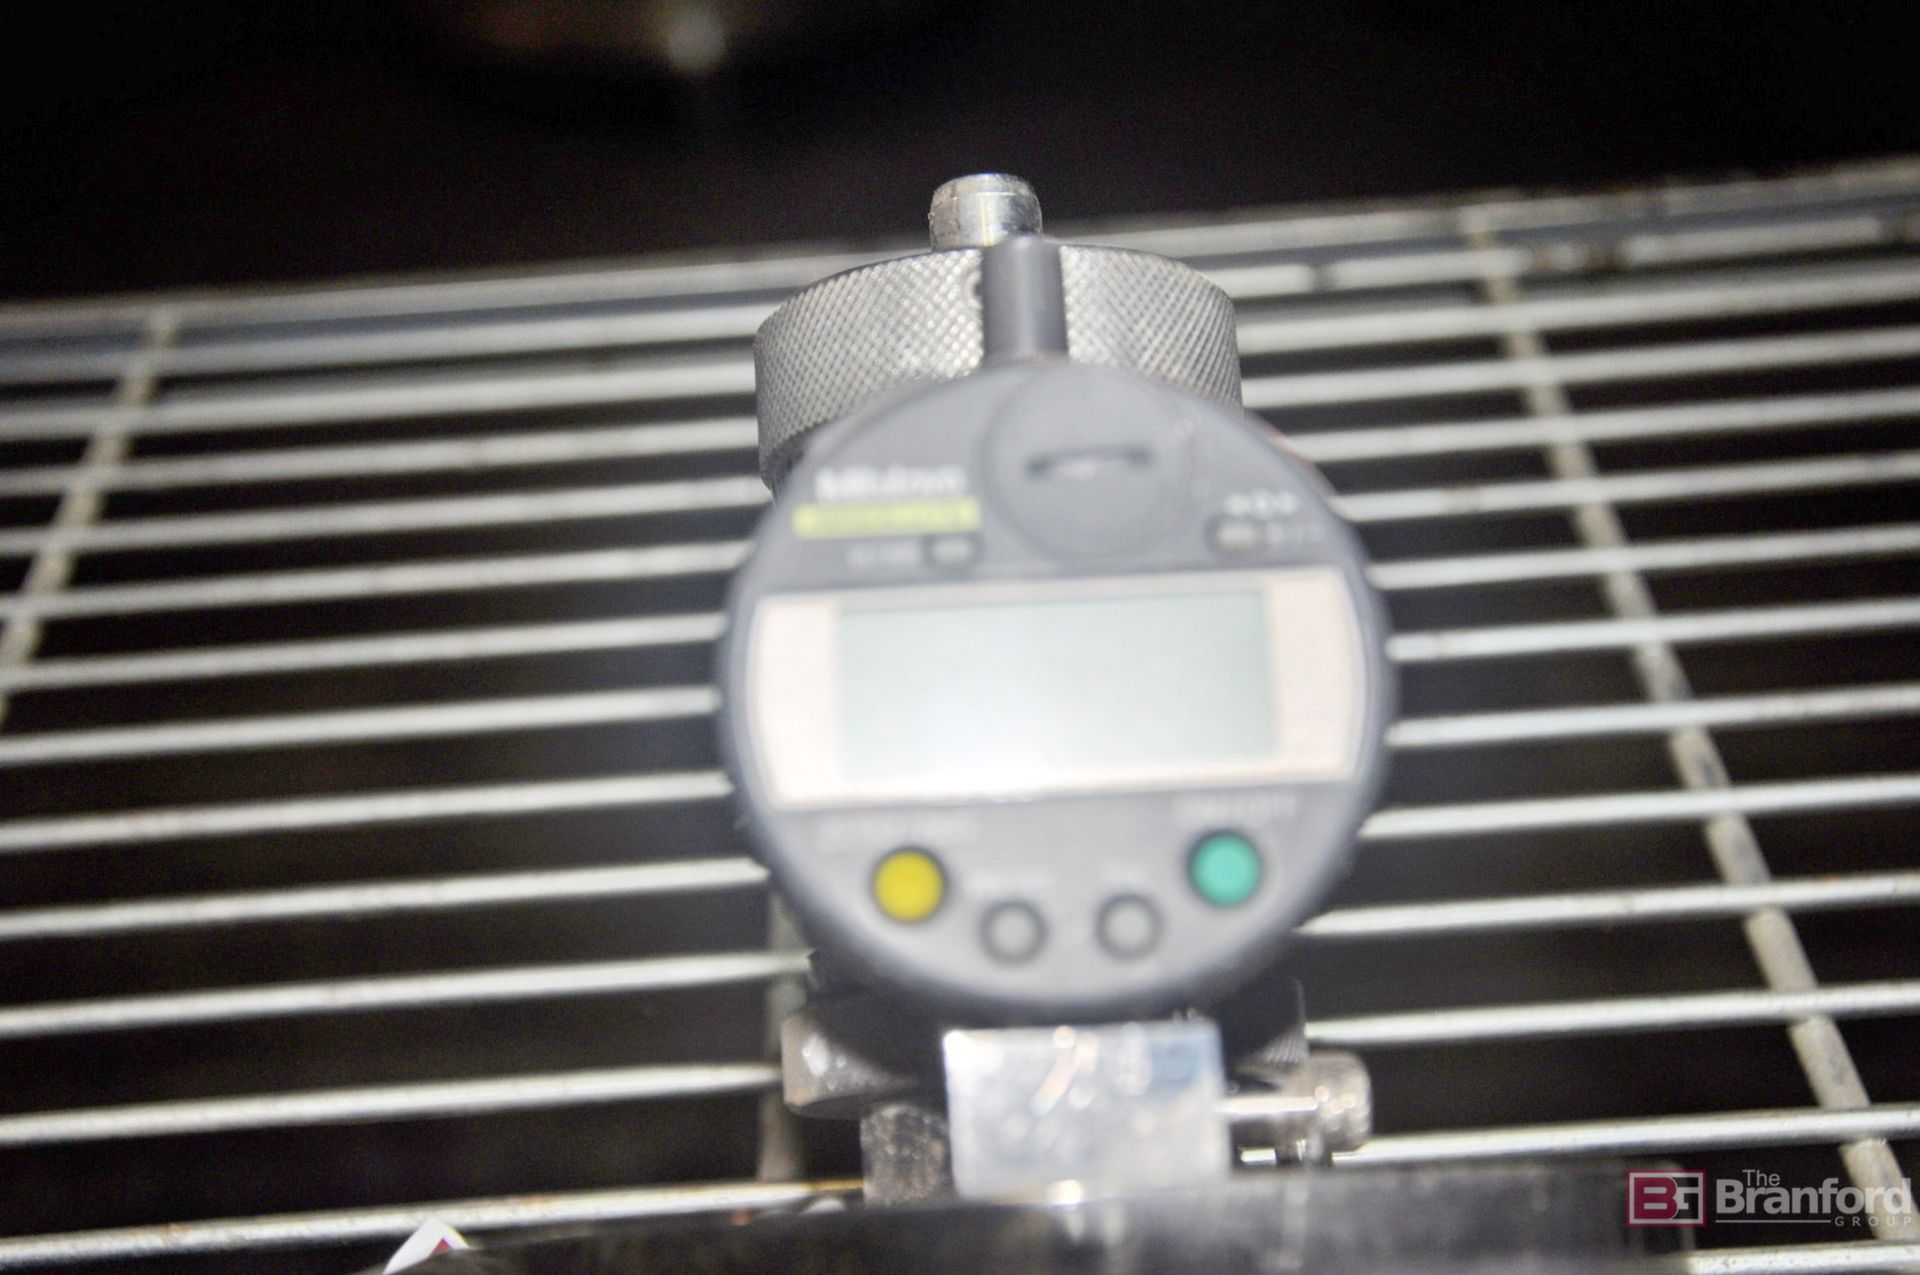 Acupole polishing fixture w/ Mitutoyo absolute thickness gauge - Image 2 of 3